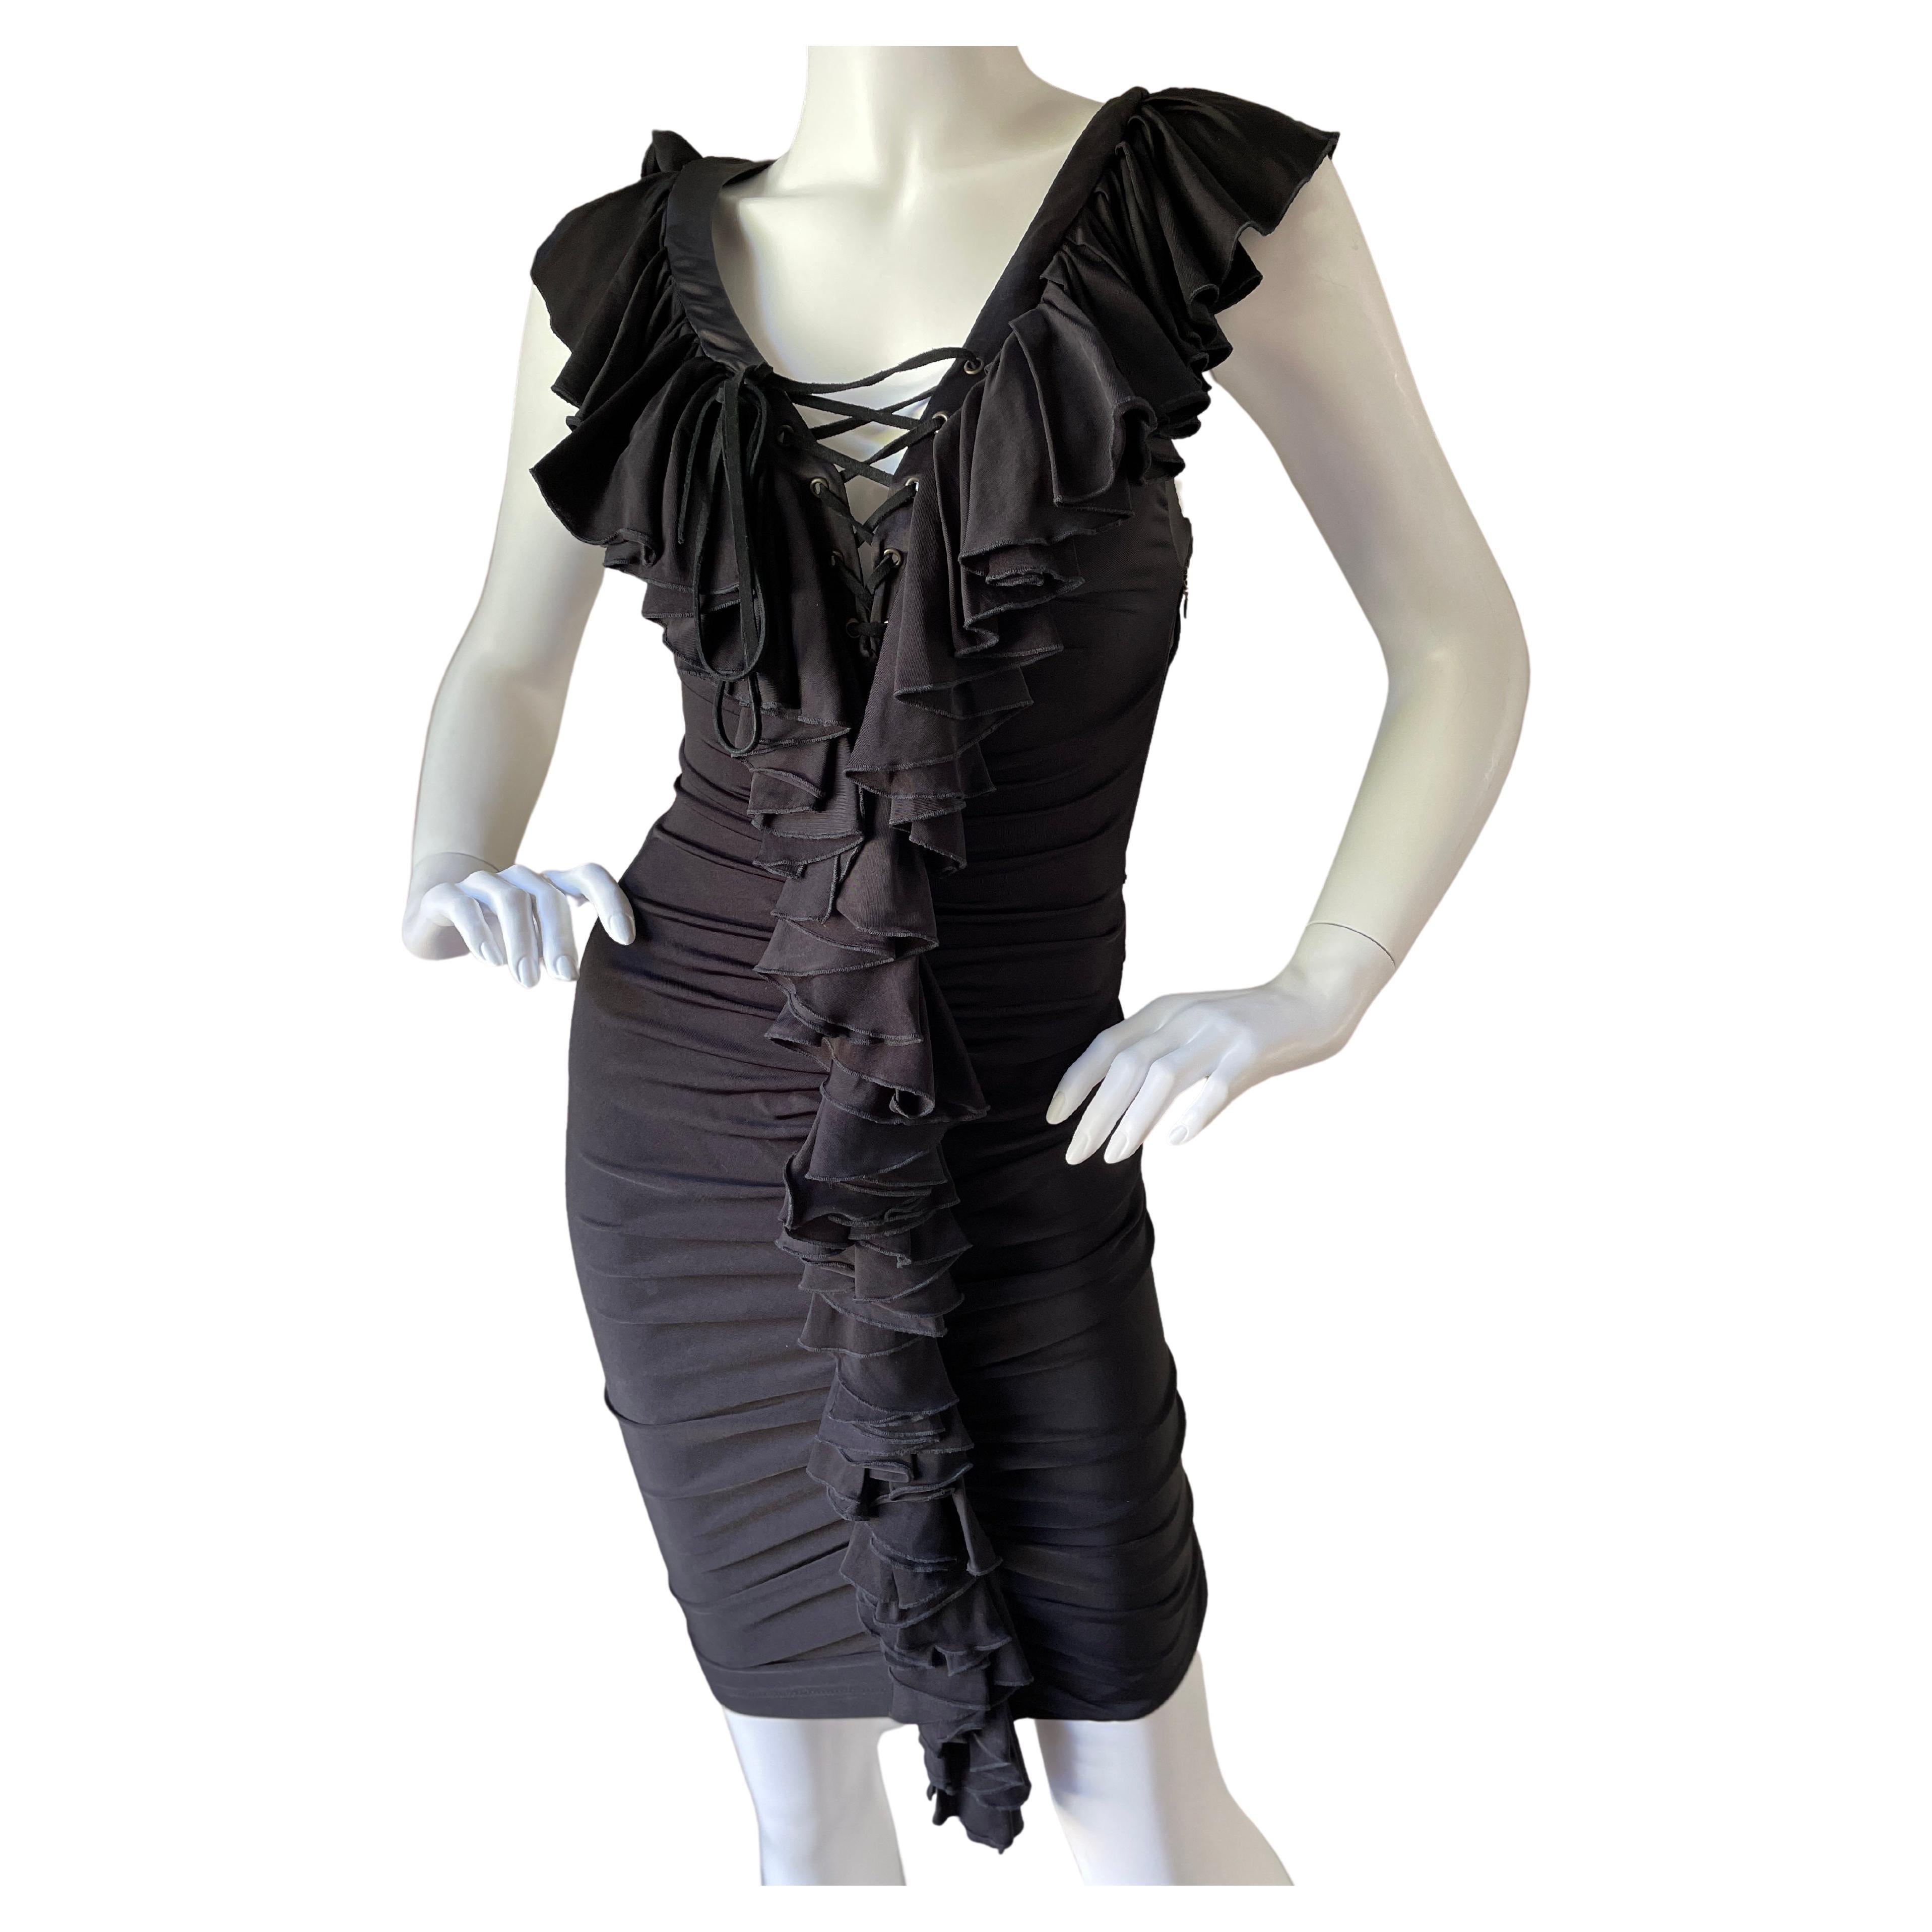 Just Cavalli Vintage Ruffled Corset Lace Cocktail Dress by Roberto Cavalli For Sale